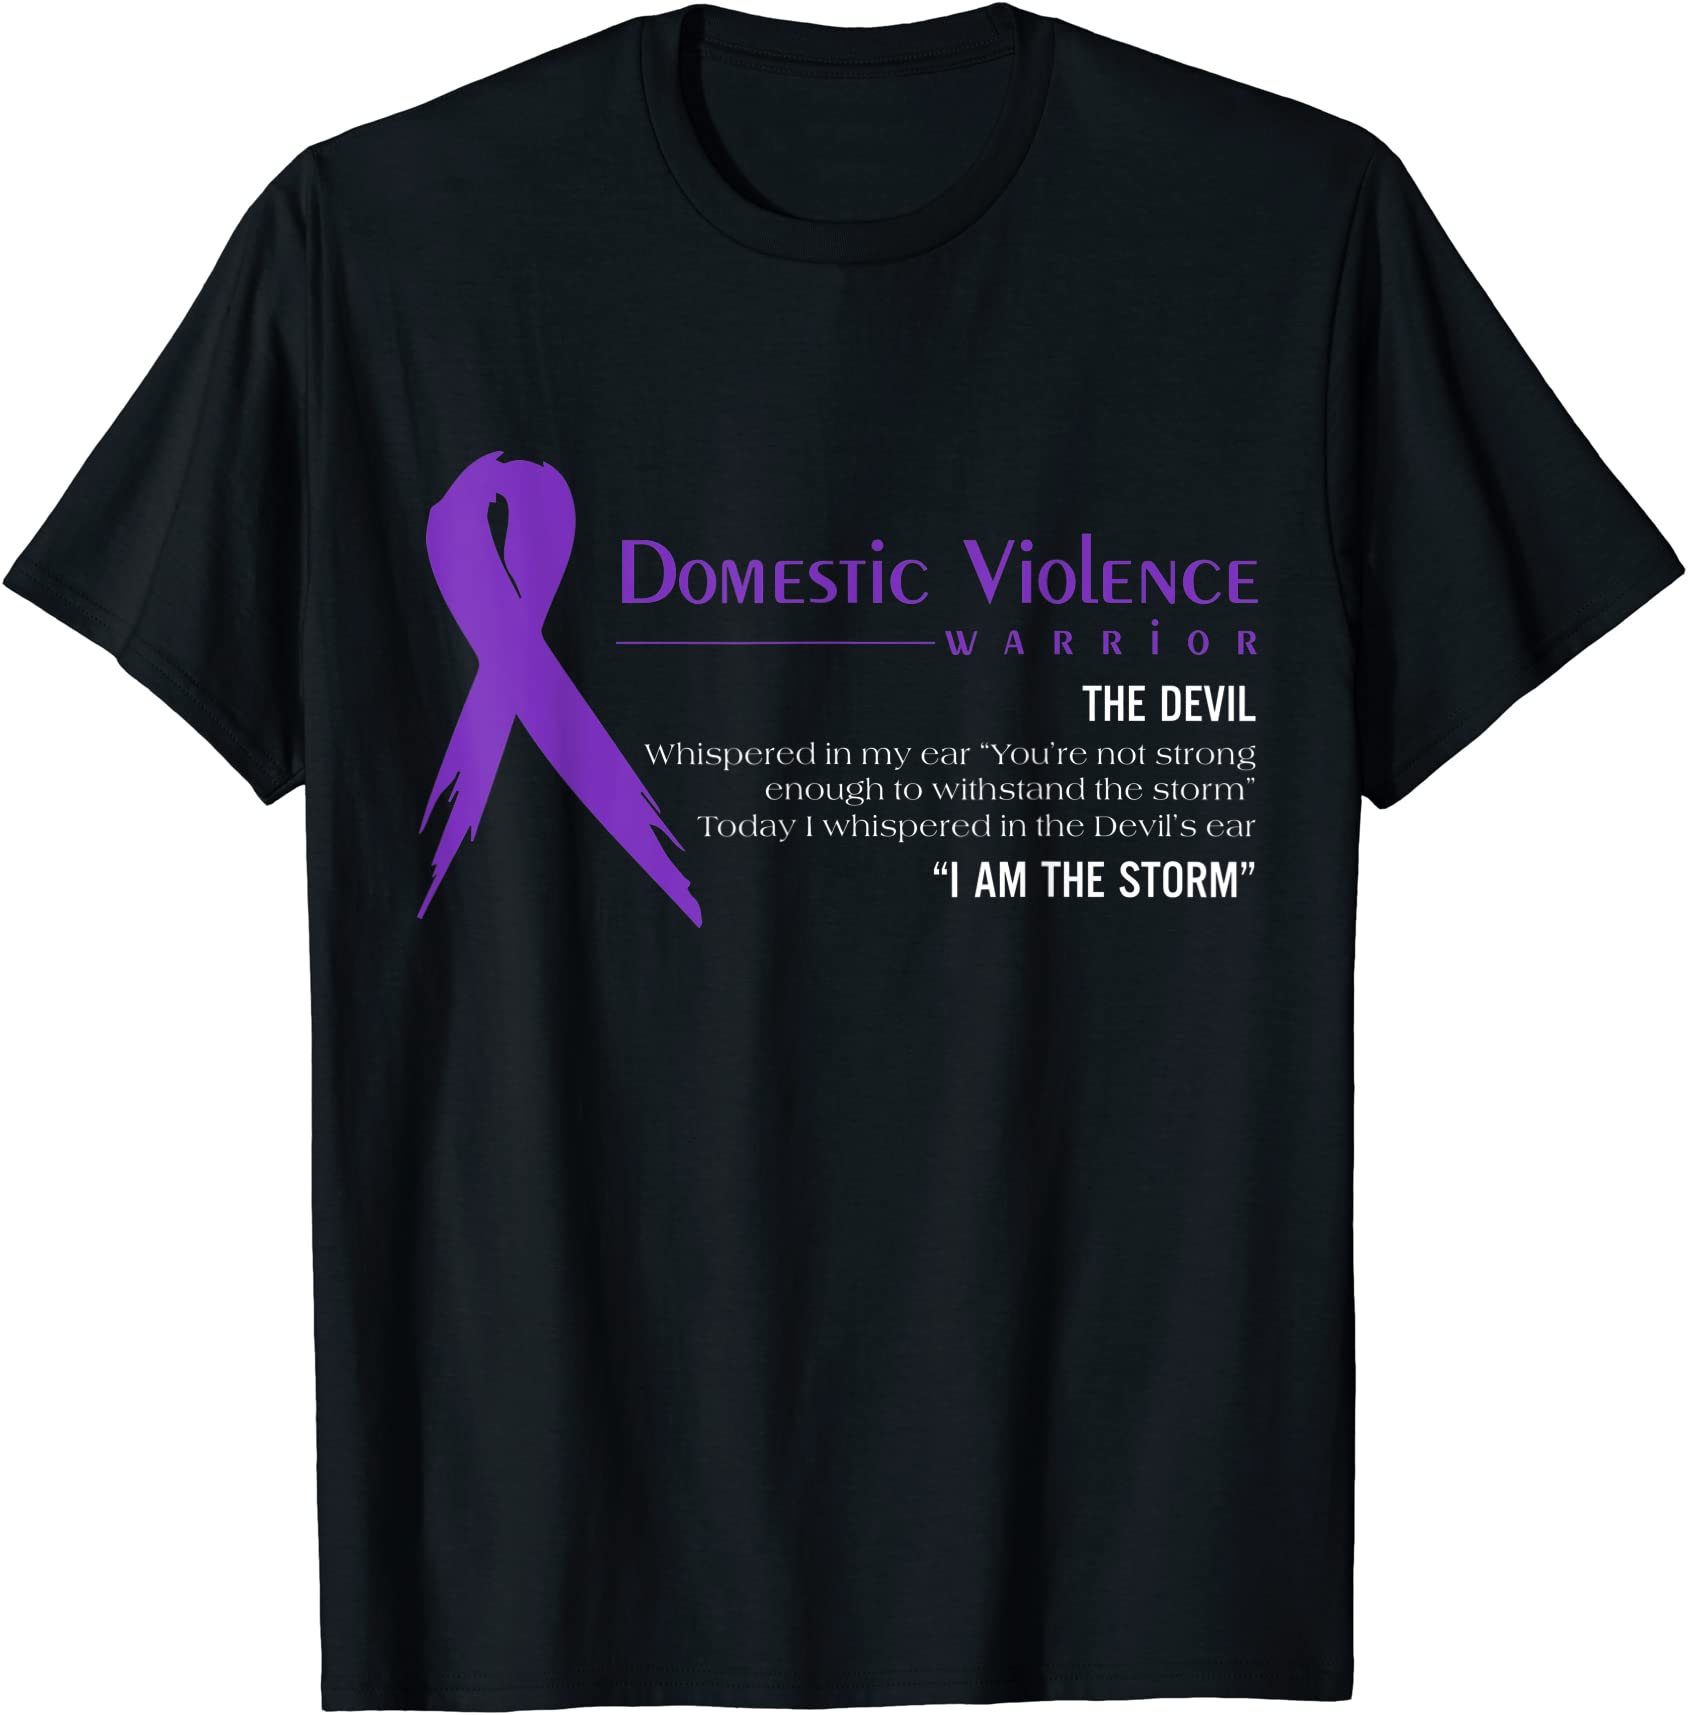 impressive quote tee for domestic violence awareness month men - Buy t ...